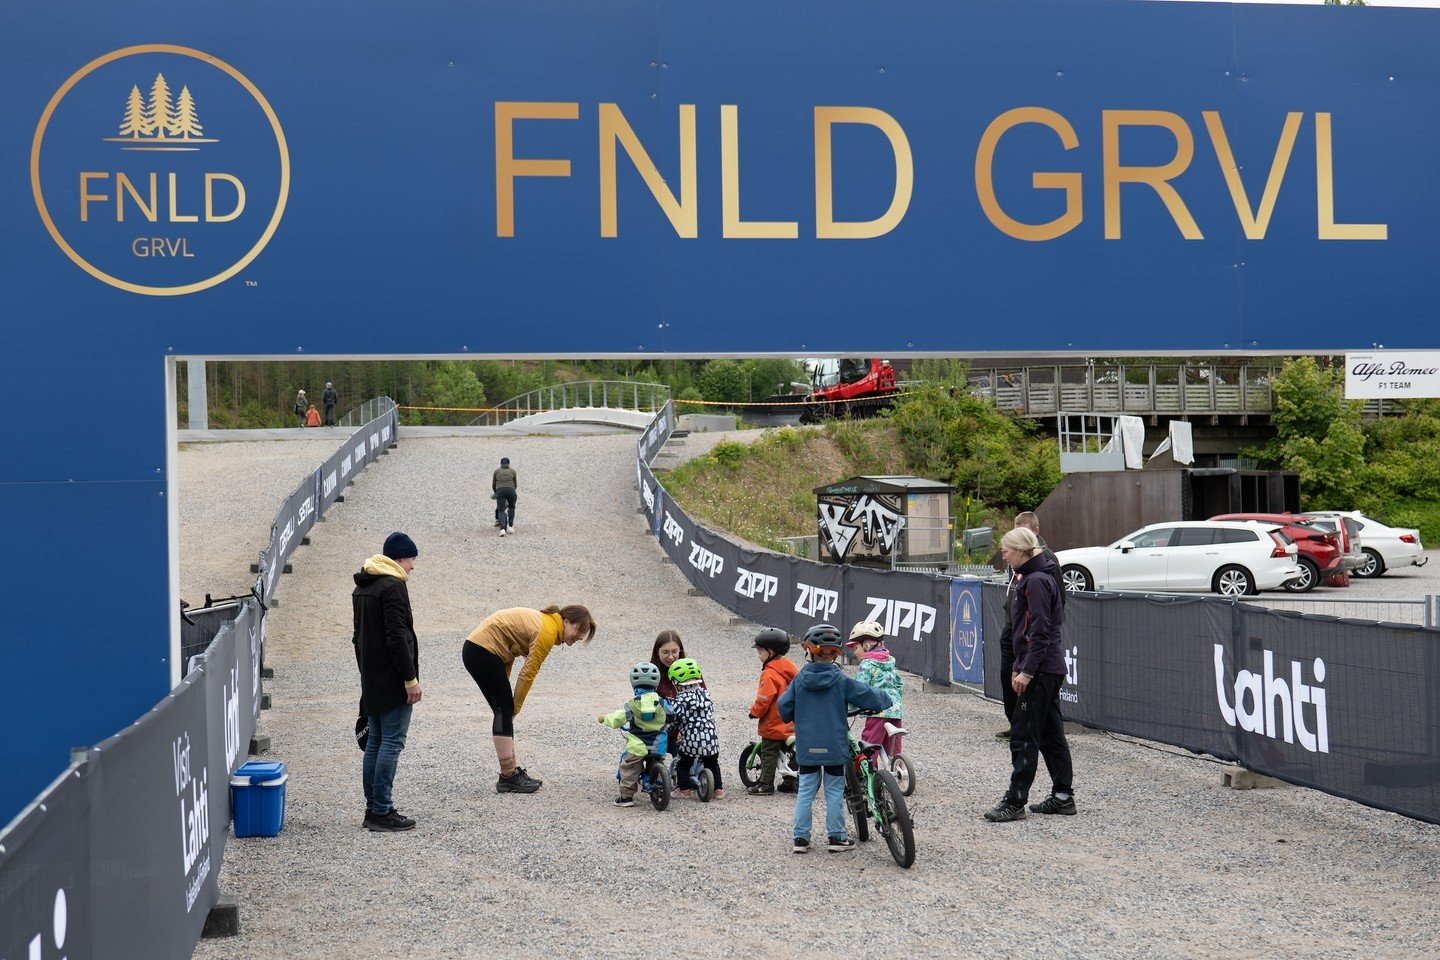 It&rsquo;s Mother's Day weekend, and we have a very special present! Give the gift of gravel cycling to mom, or influential woman in your life! When you purchase one FNLD GRVL entry before Monday, you&rsquo;ll receive a discount code for 50% off one 